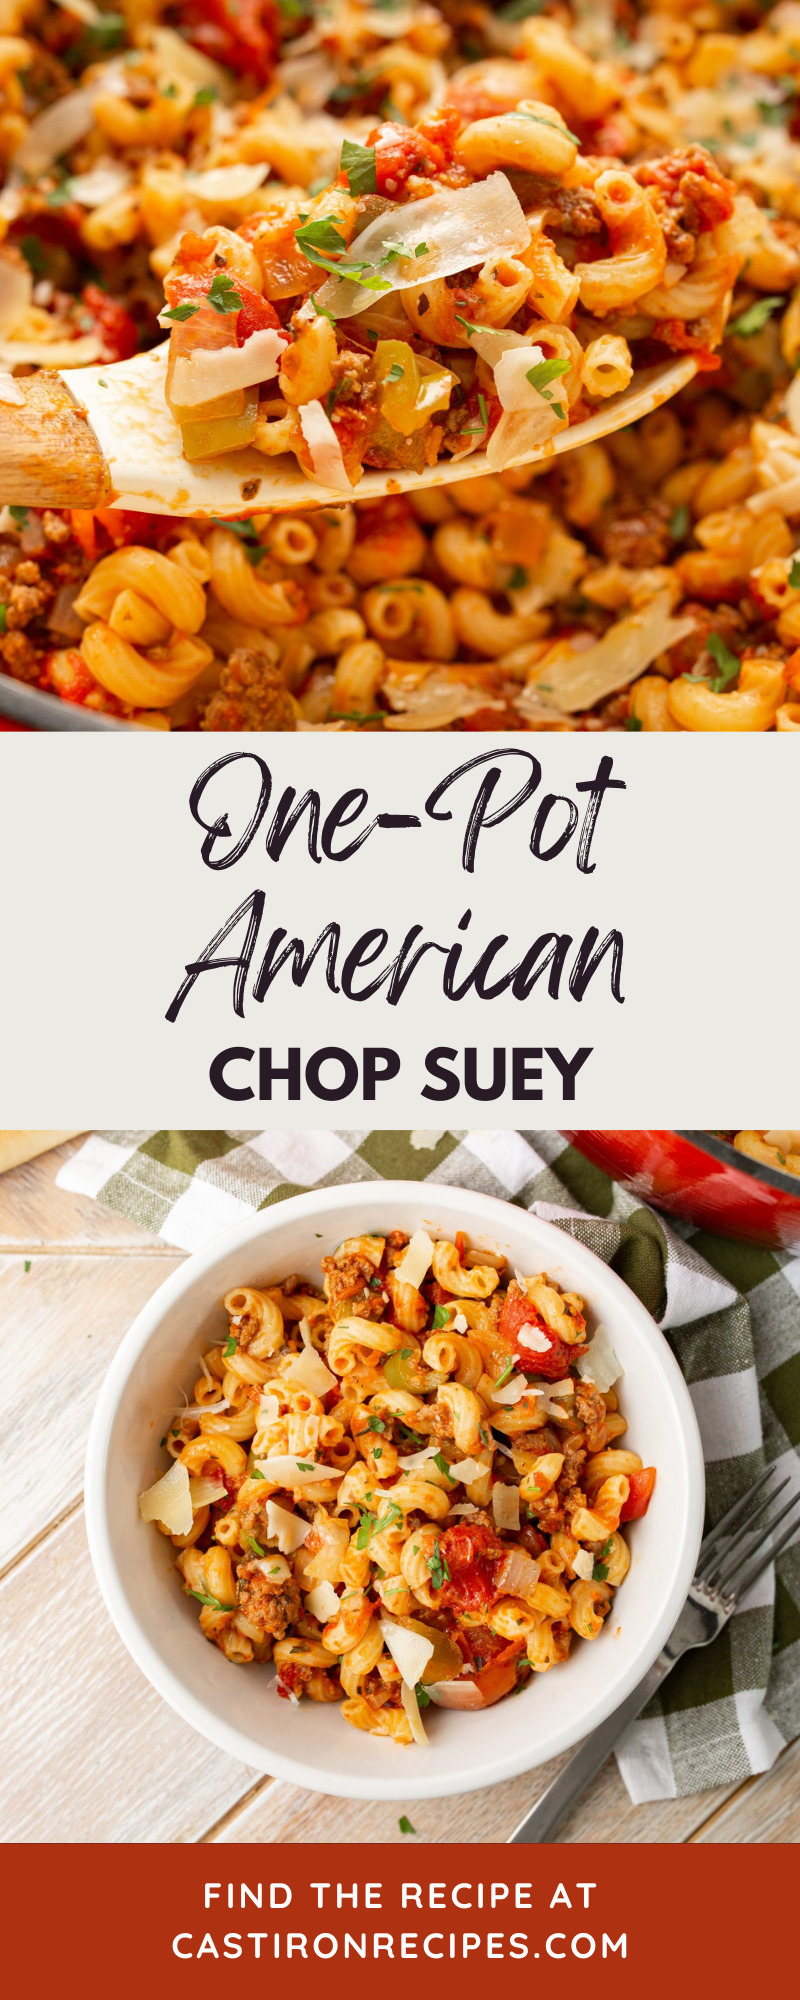 One Pot American Goulash is a meal that brings the whole kitchen and family together for dinner. Grab leftover ingredients from around your kitchen and throw them into a Dutch oven for a quick and easy meal adults and kids can’t get enough of! This recipe is perfect for customizing to fit your families or your guests needs.